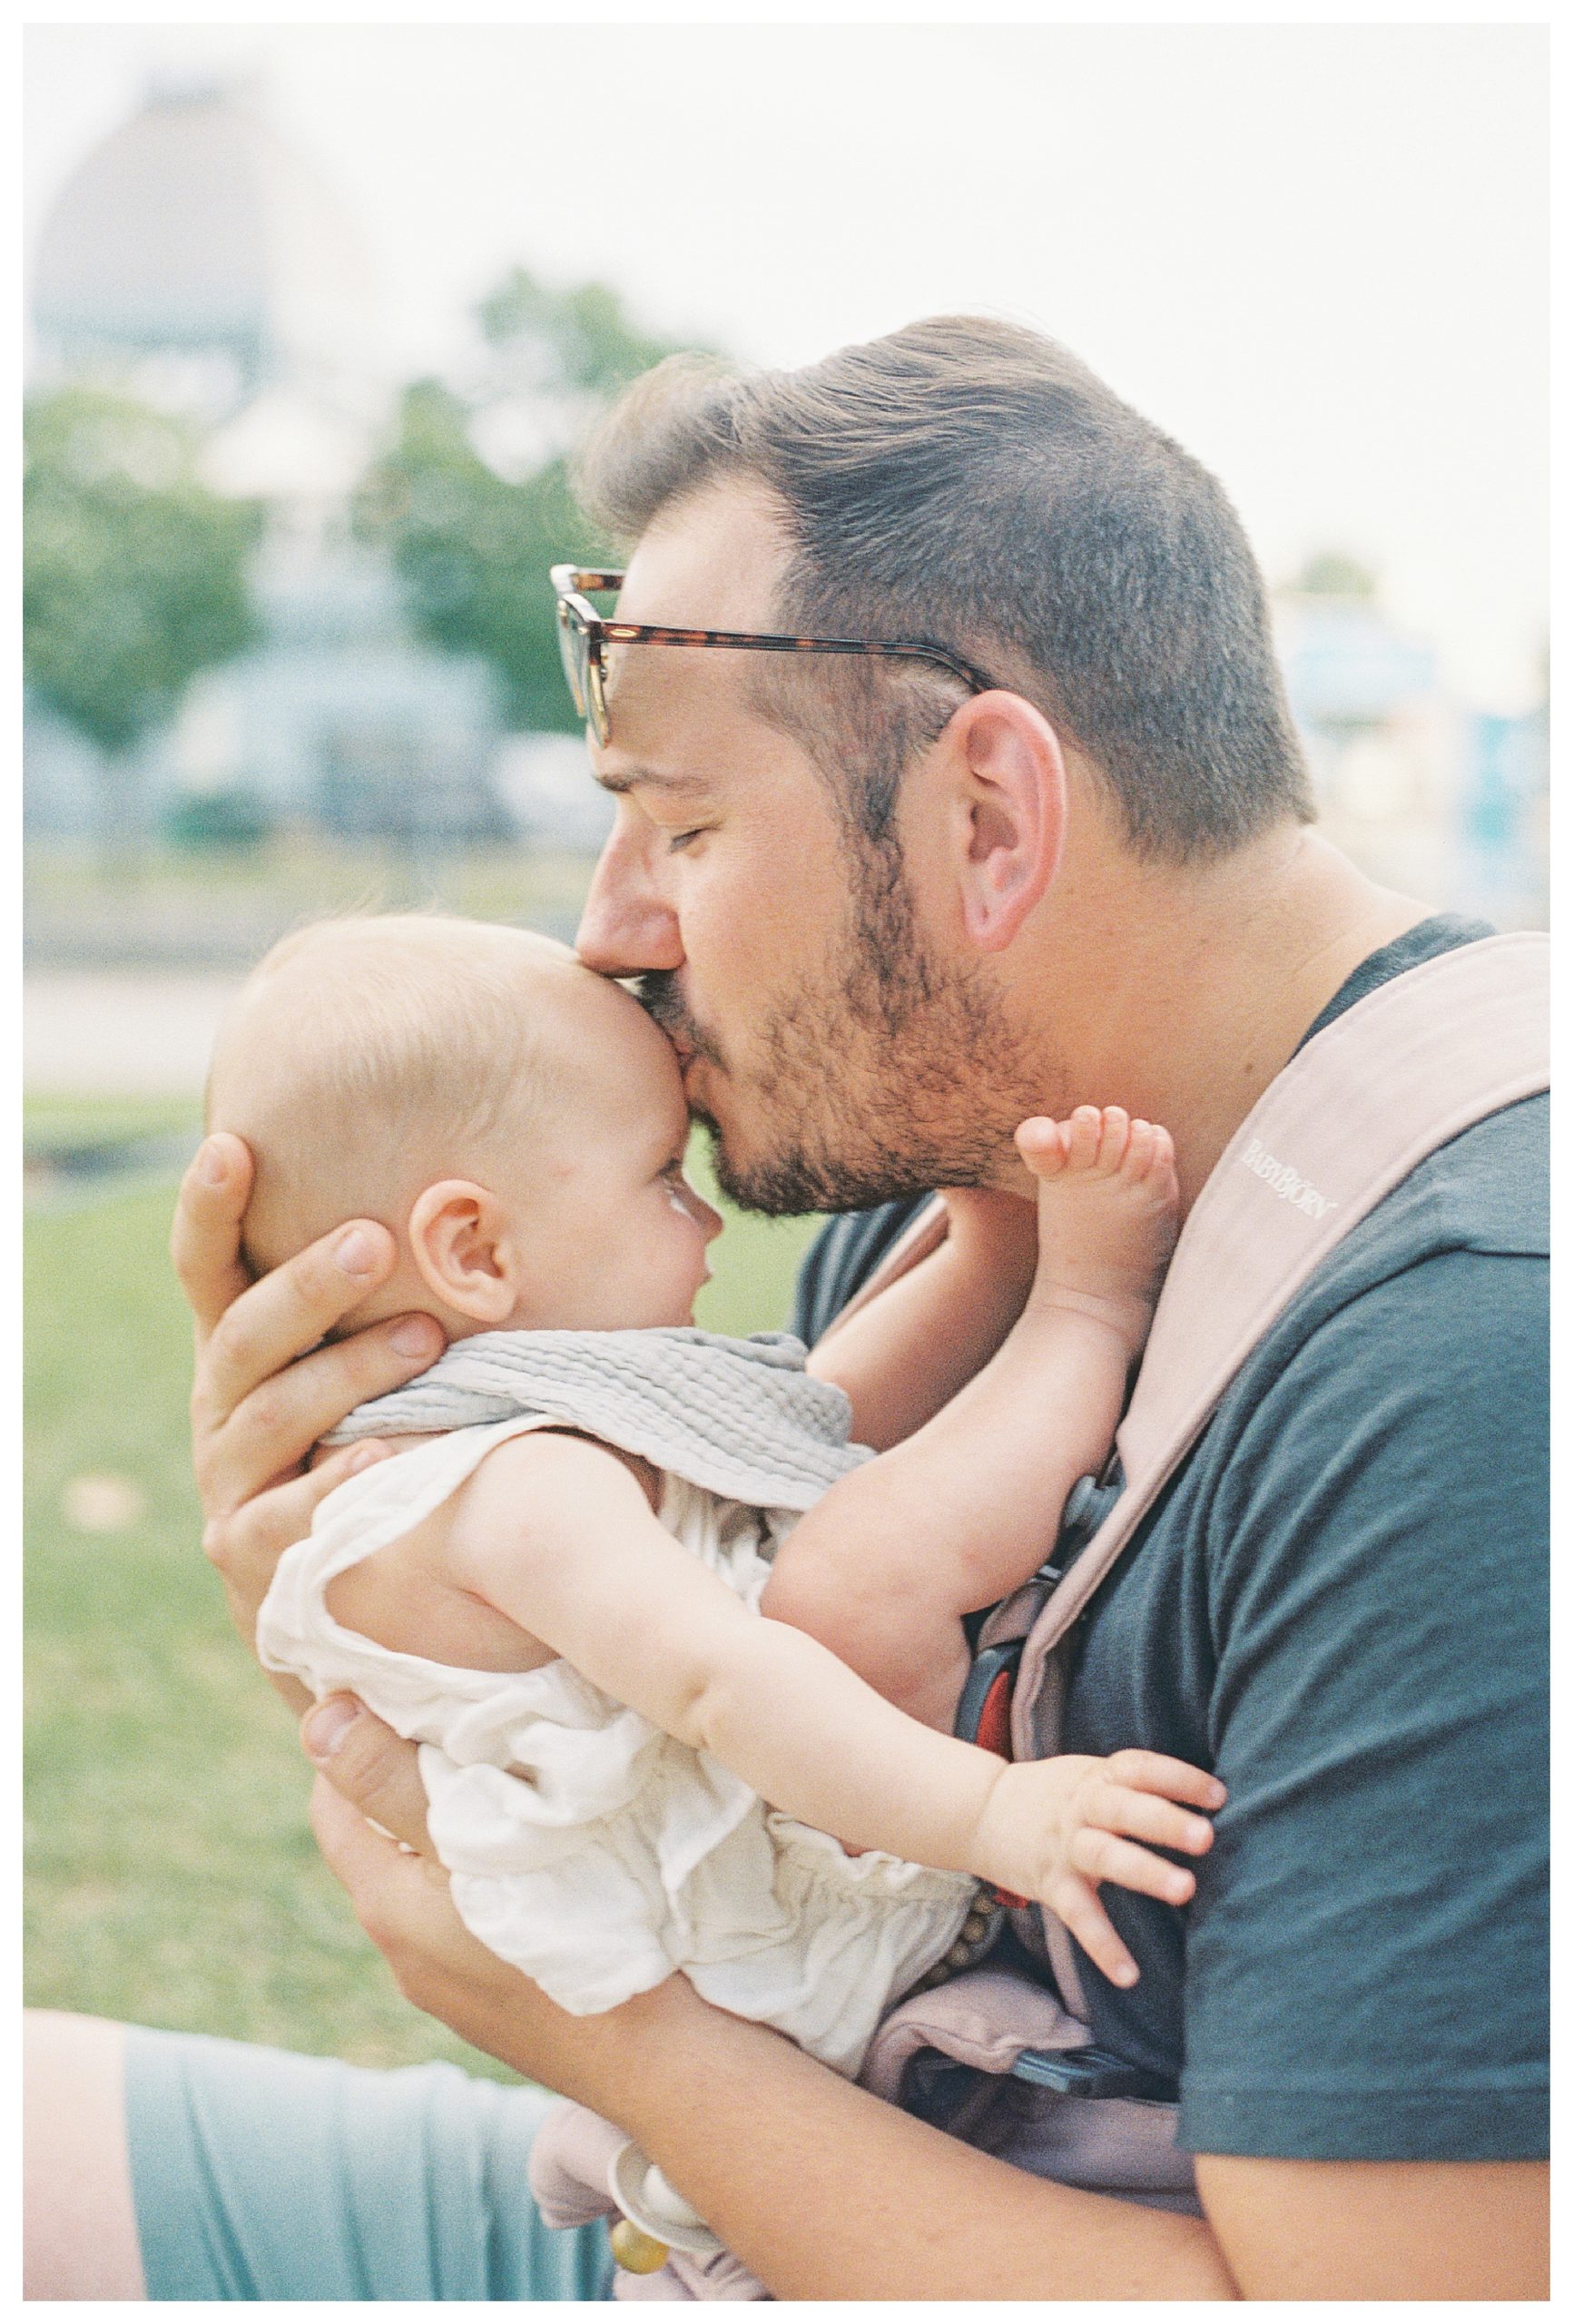 Father leans down to kiss his infant daughter on the forehead while sitting in a park.